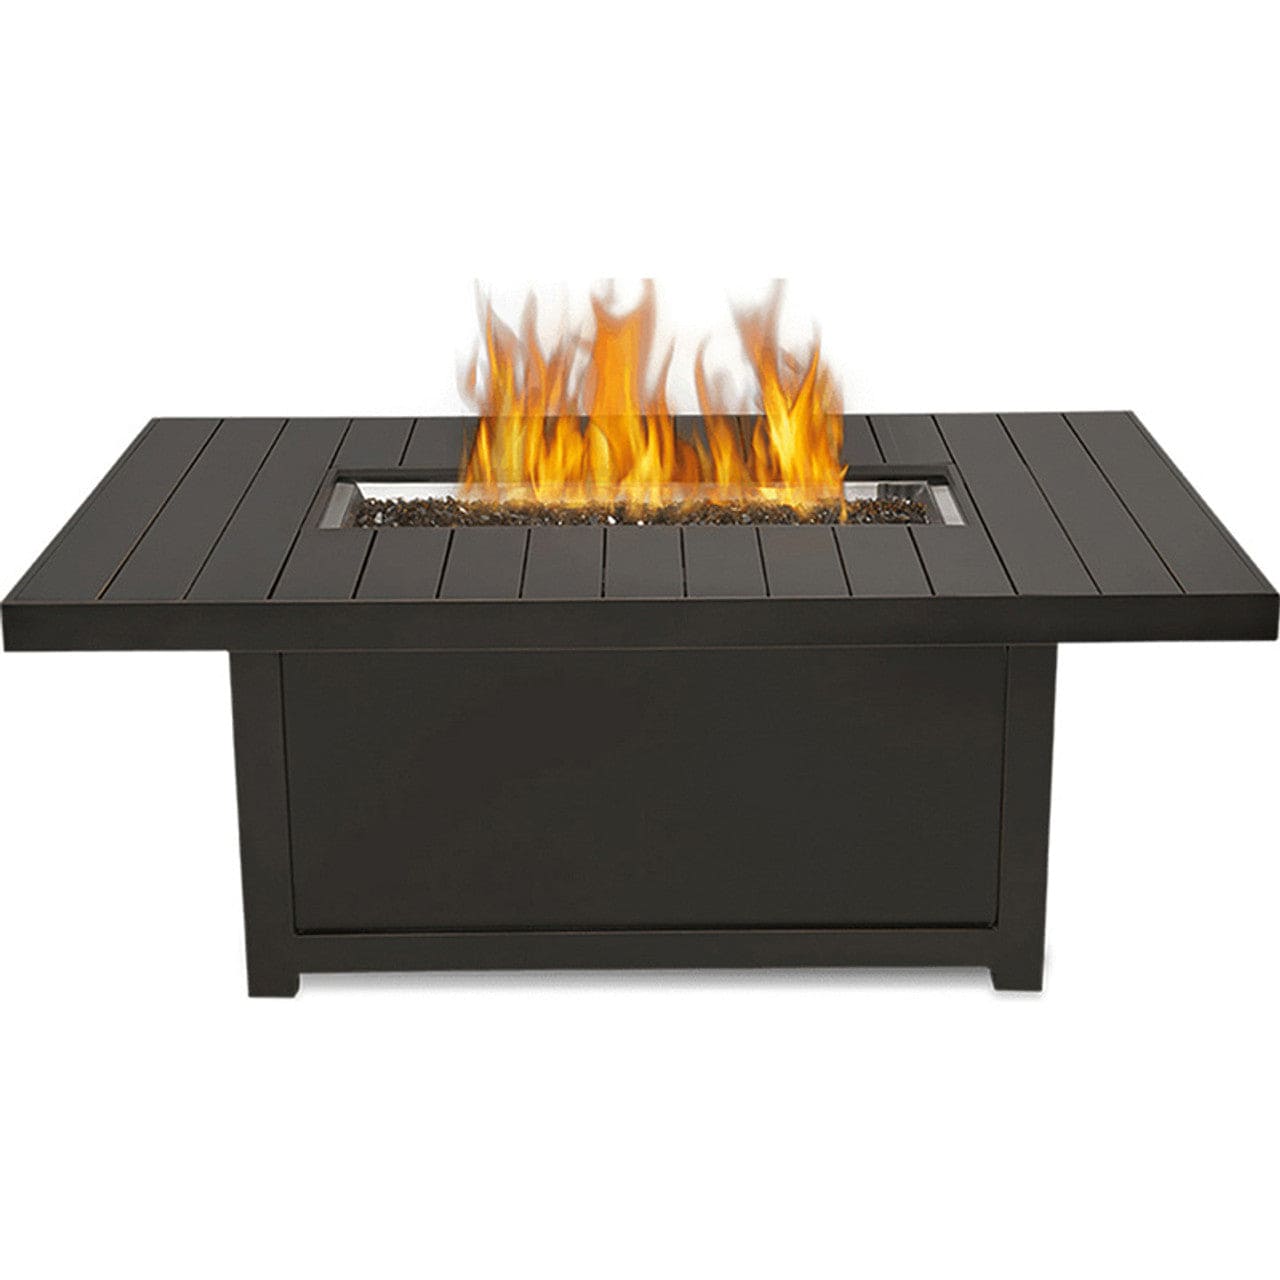 St. Tropez Rectangle Propane Patioflame Table - STTR1-BZ - Chimney Cricket